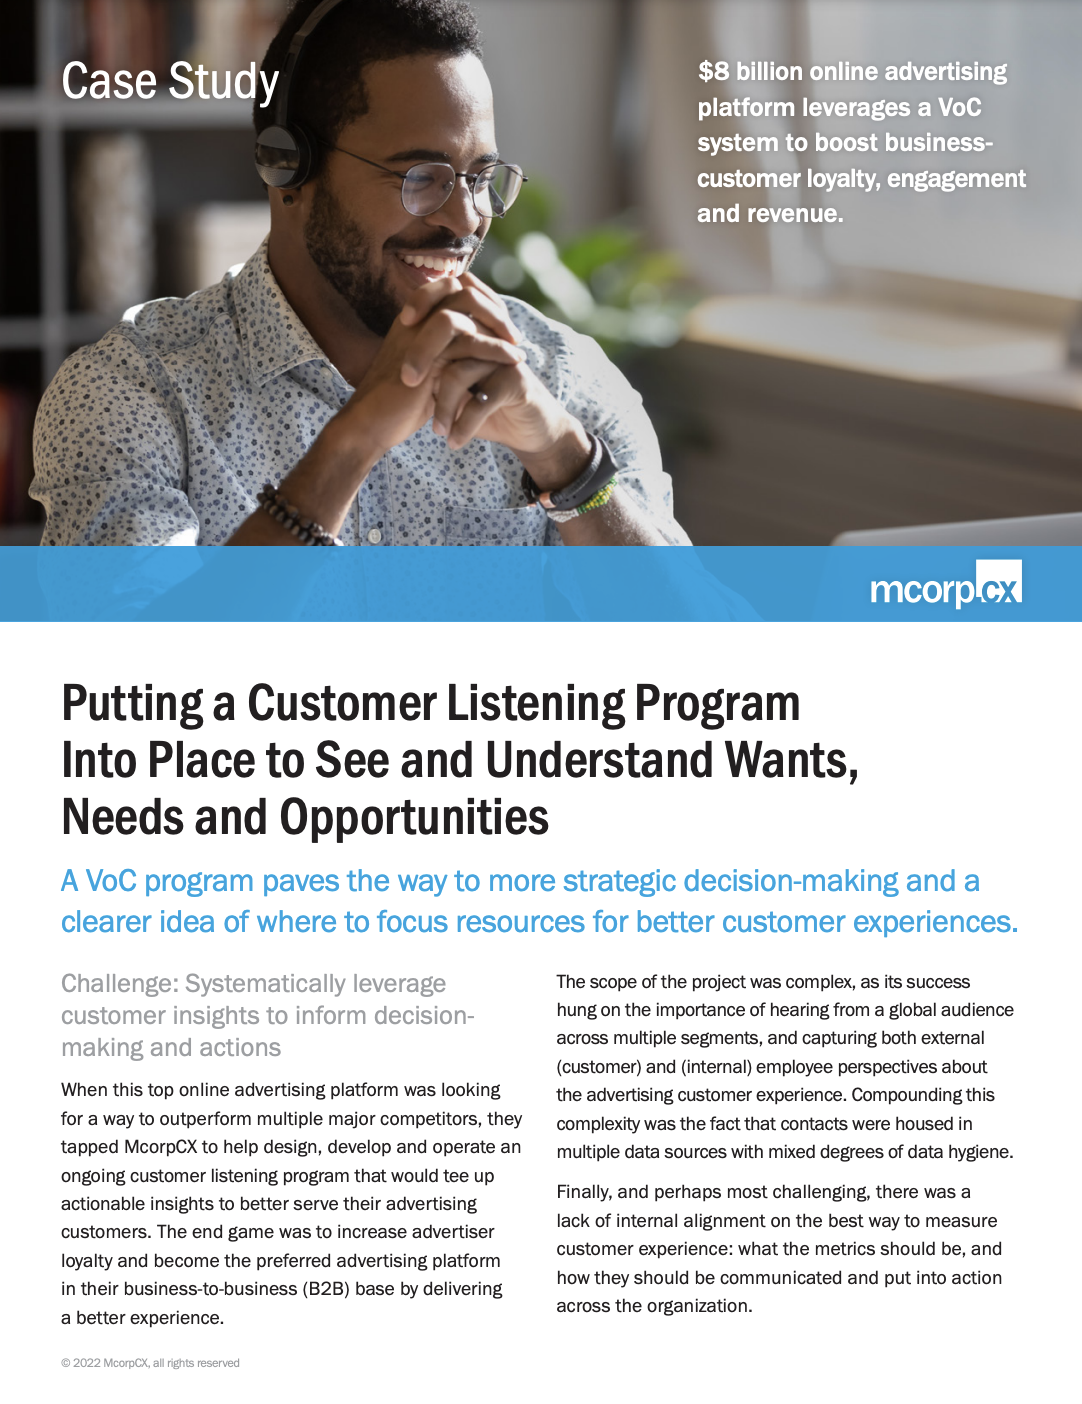 Putting a Customer Listening Program Into Place